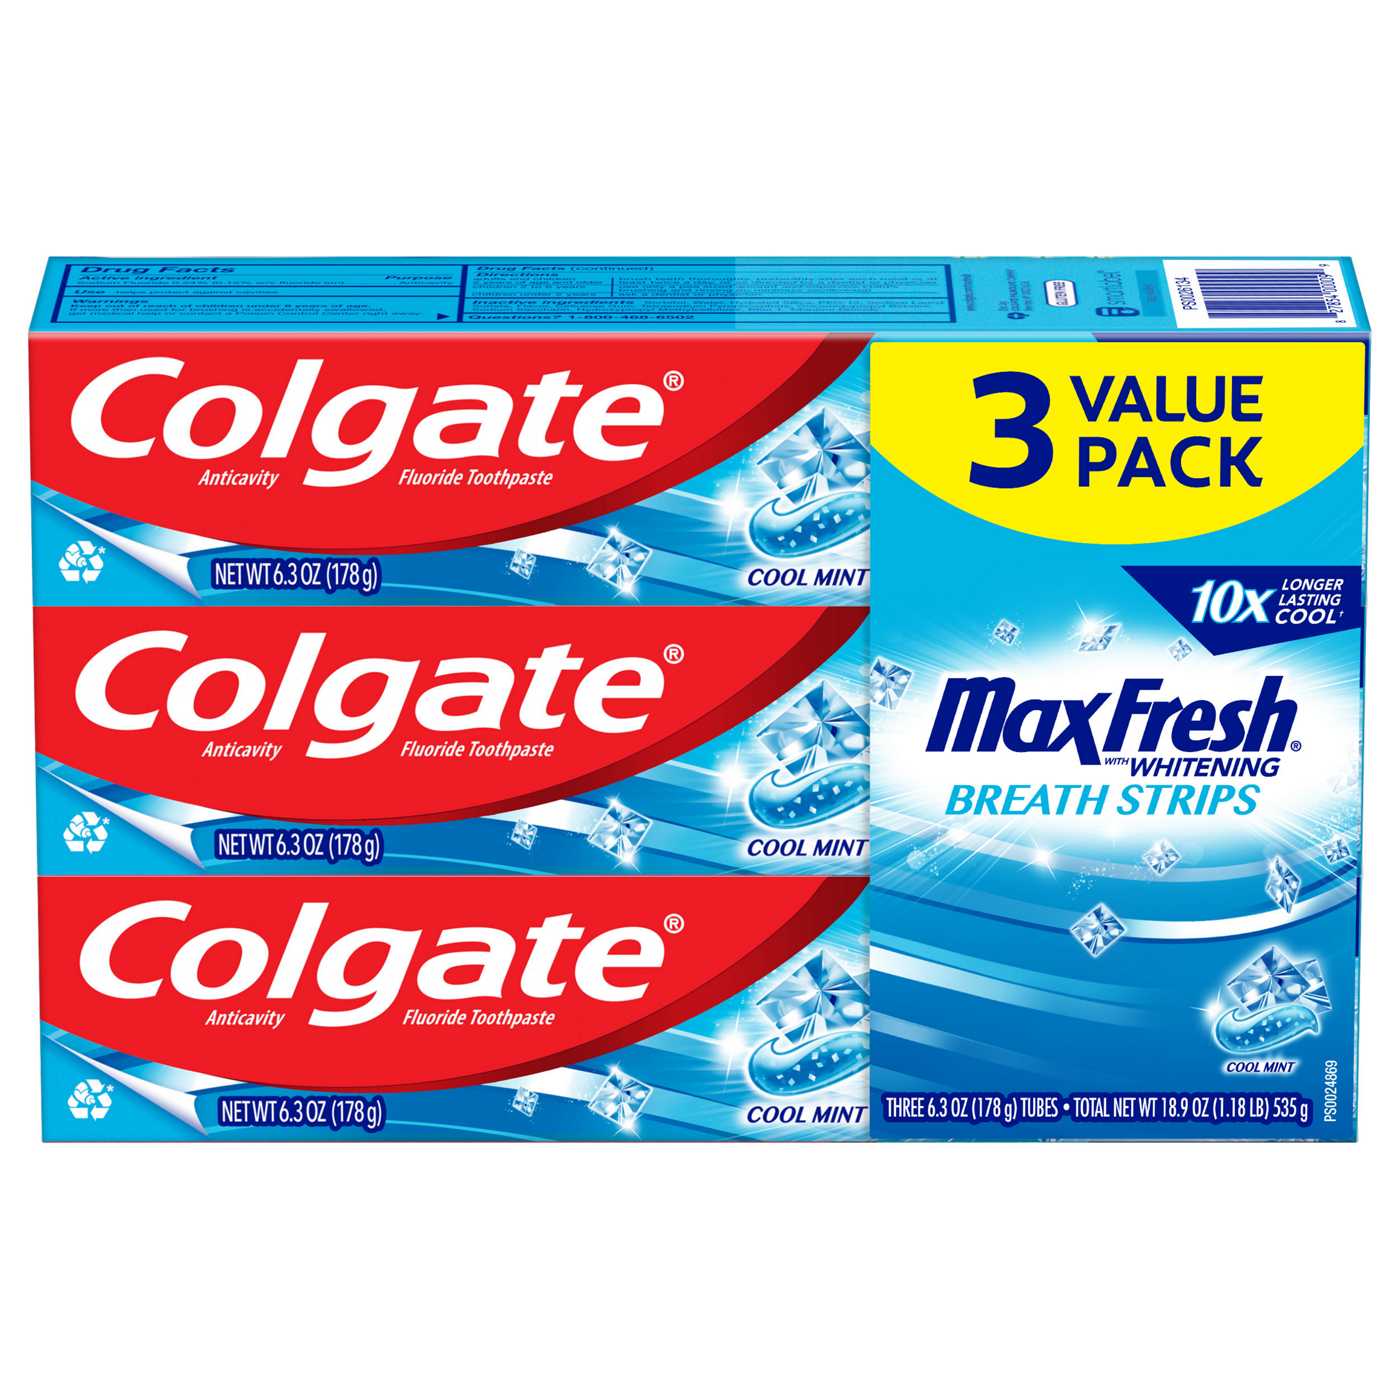 Colgate Max Fresh Whitening Anticavity Toothpaste - Cool Mint; image 1 of 2